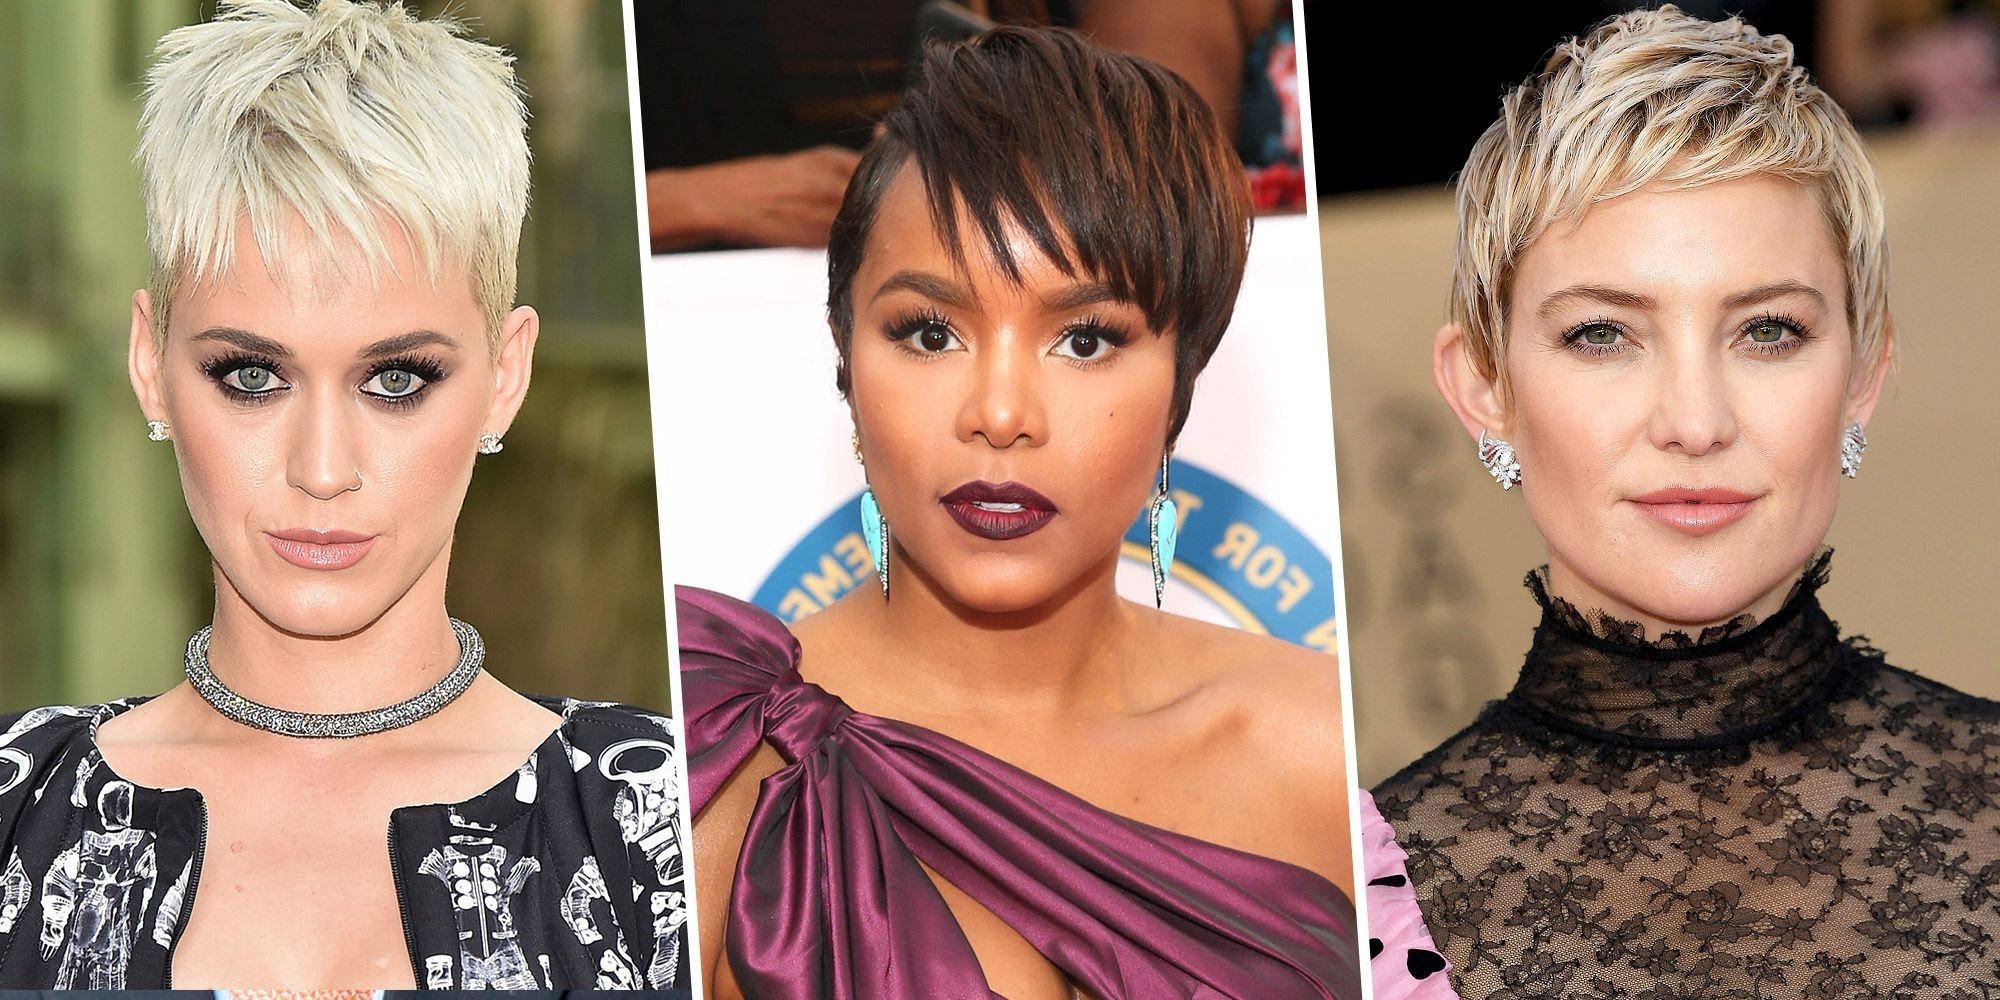 53 Best Pixie Cut Hairstyle Ideas 2018 – Cute Celebrity Pixie Haircuts Intended For Best And Newest Rocker Pixie Hairstyles (View 16 of 20)